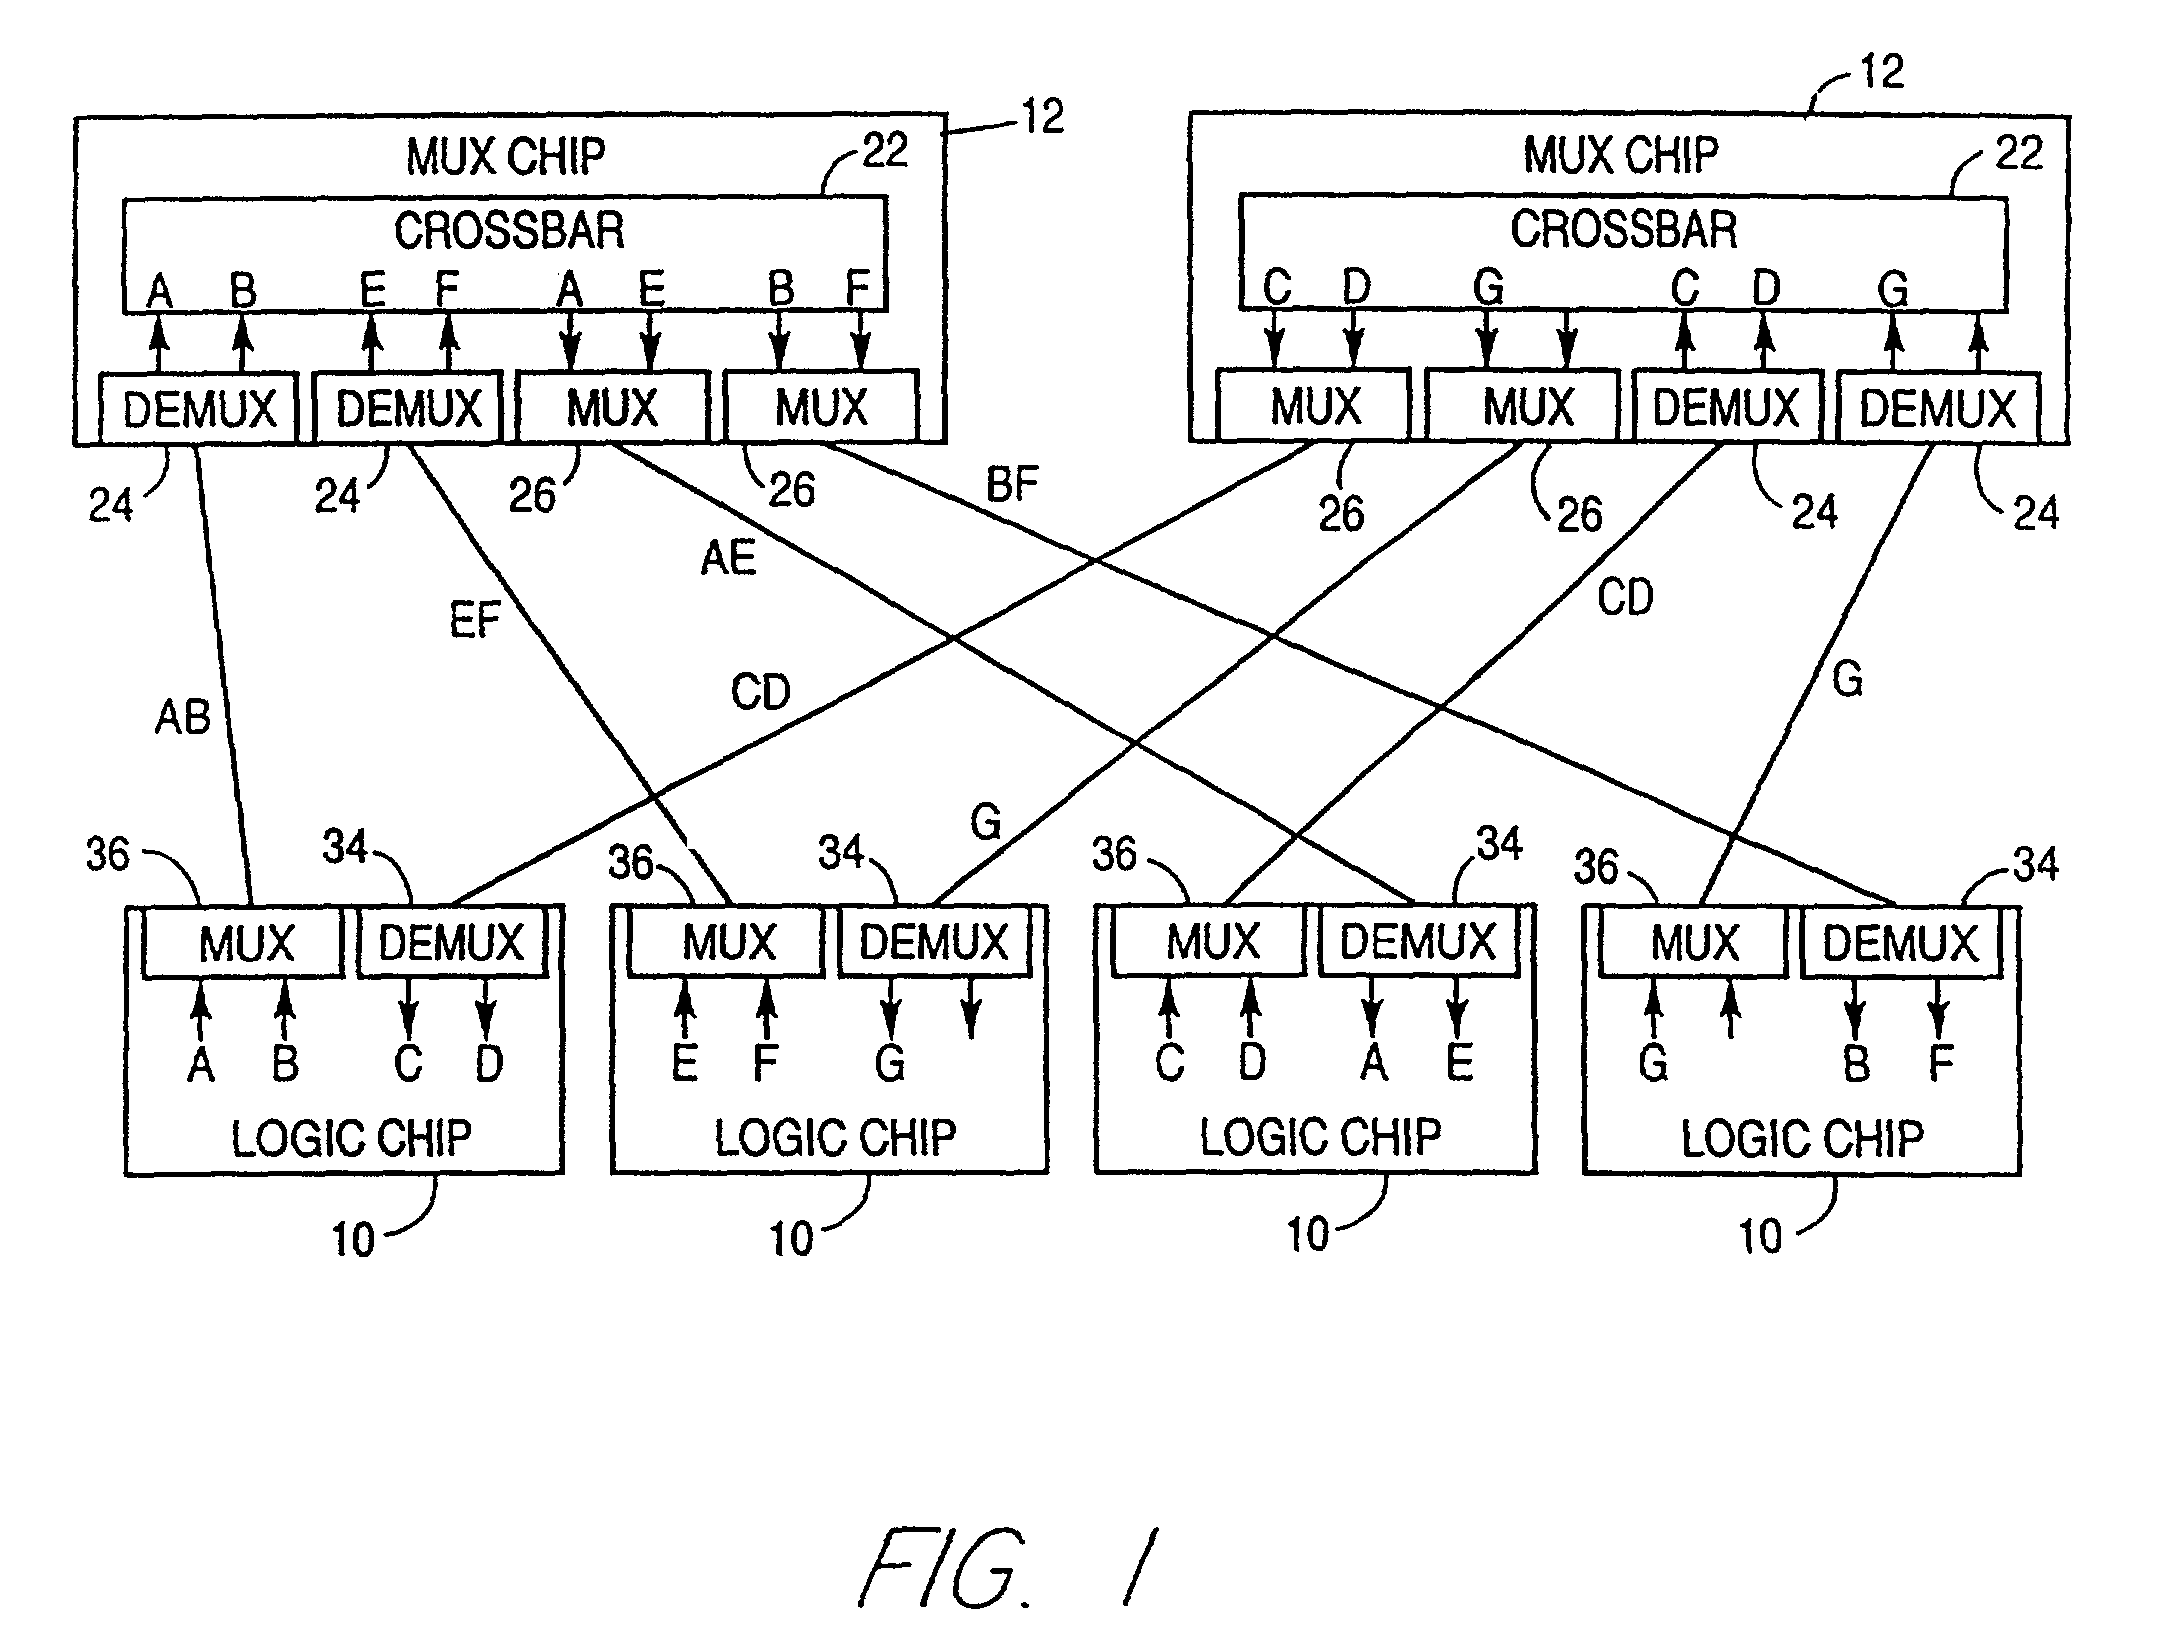 Emulation system with time-multiplexed interconnect